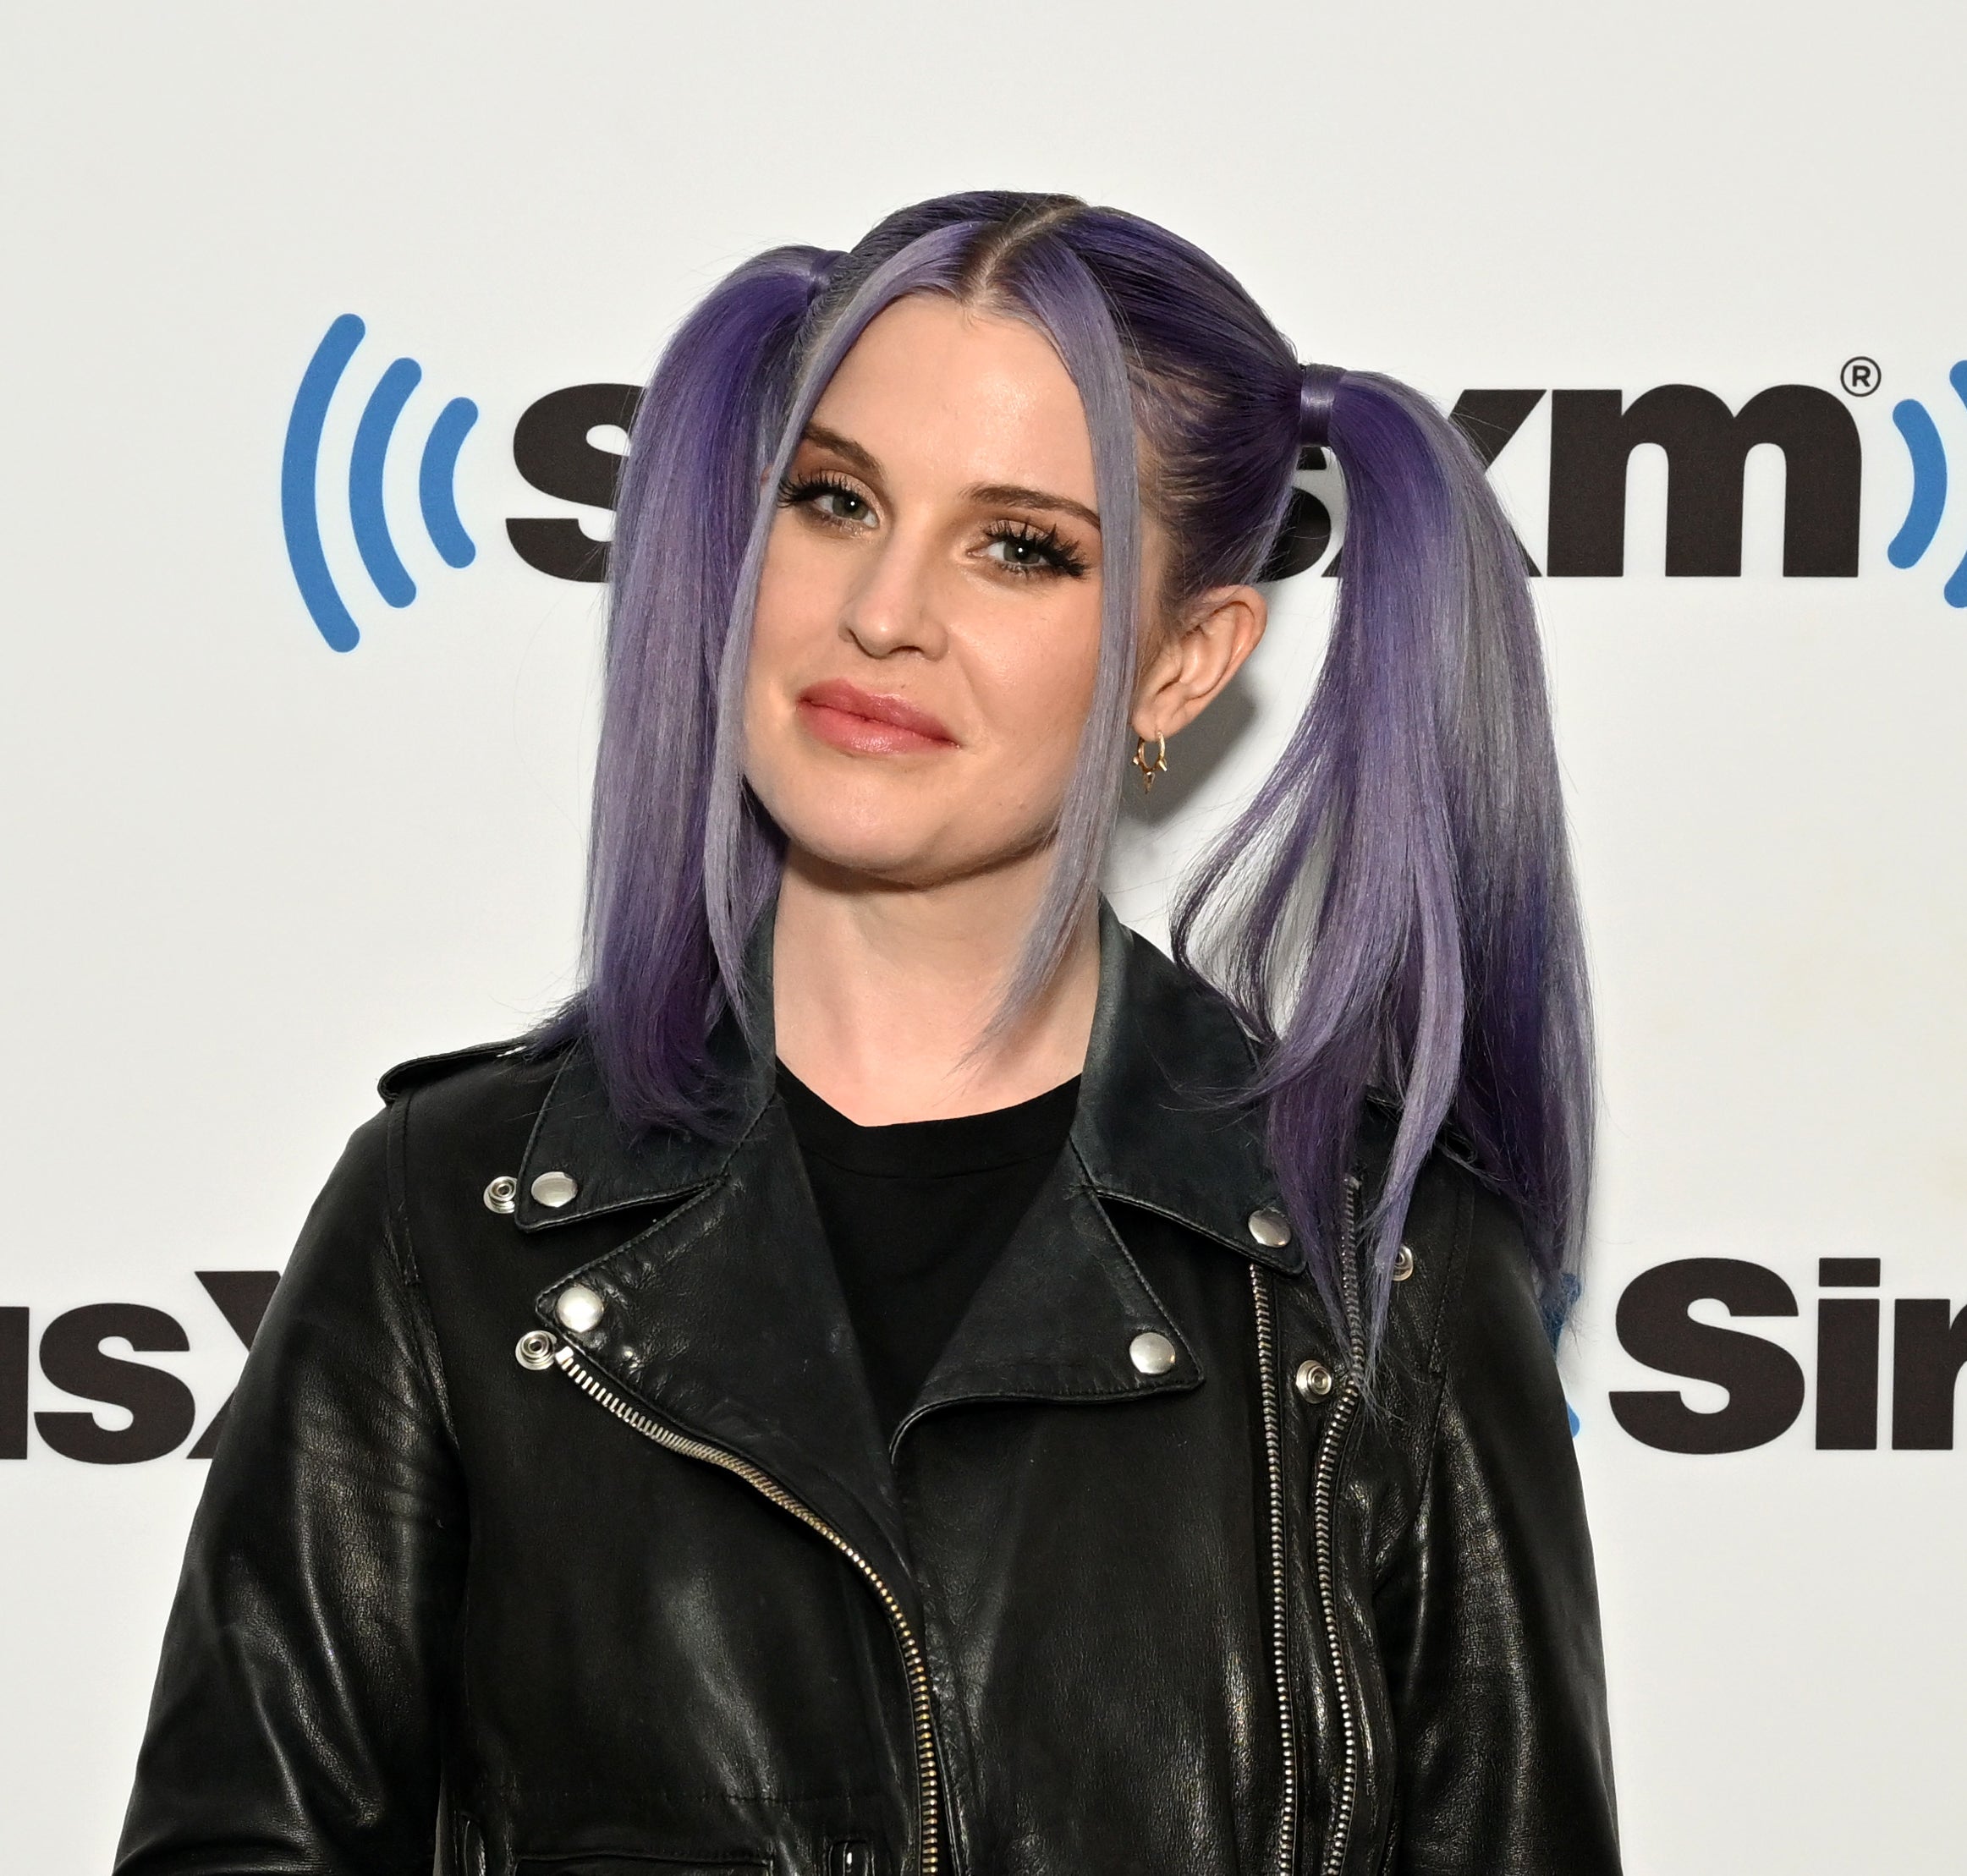 Close-up of Kelly at a media event in pigtails and a leather jacket